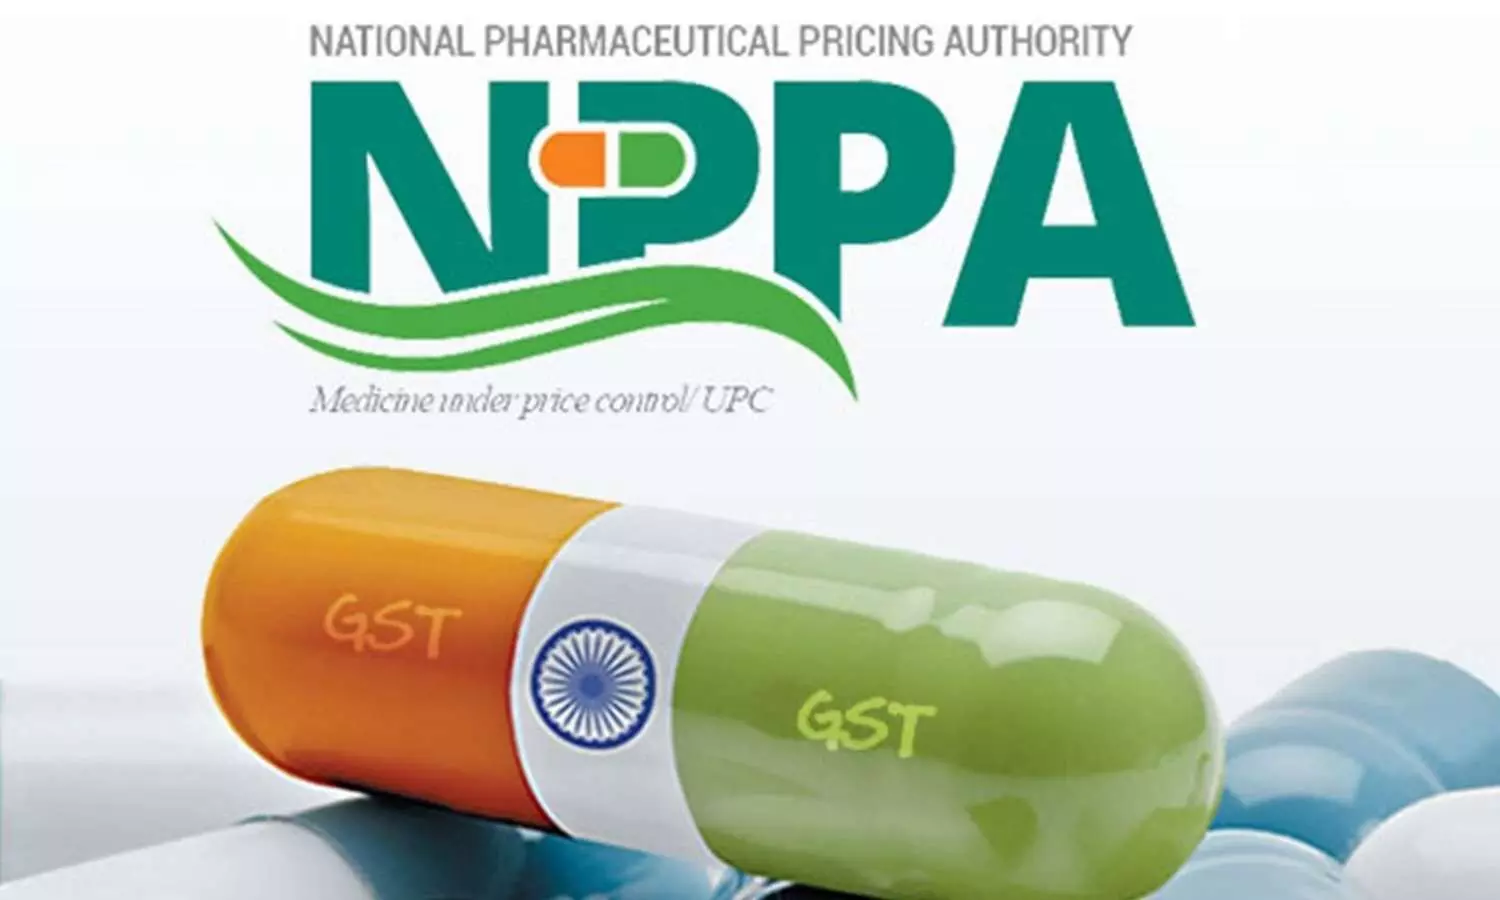 Furnish PTR, MAT Value in respect of oxygen and nitrous oxide: NPPA